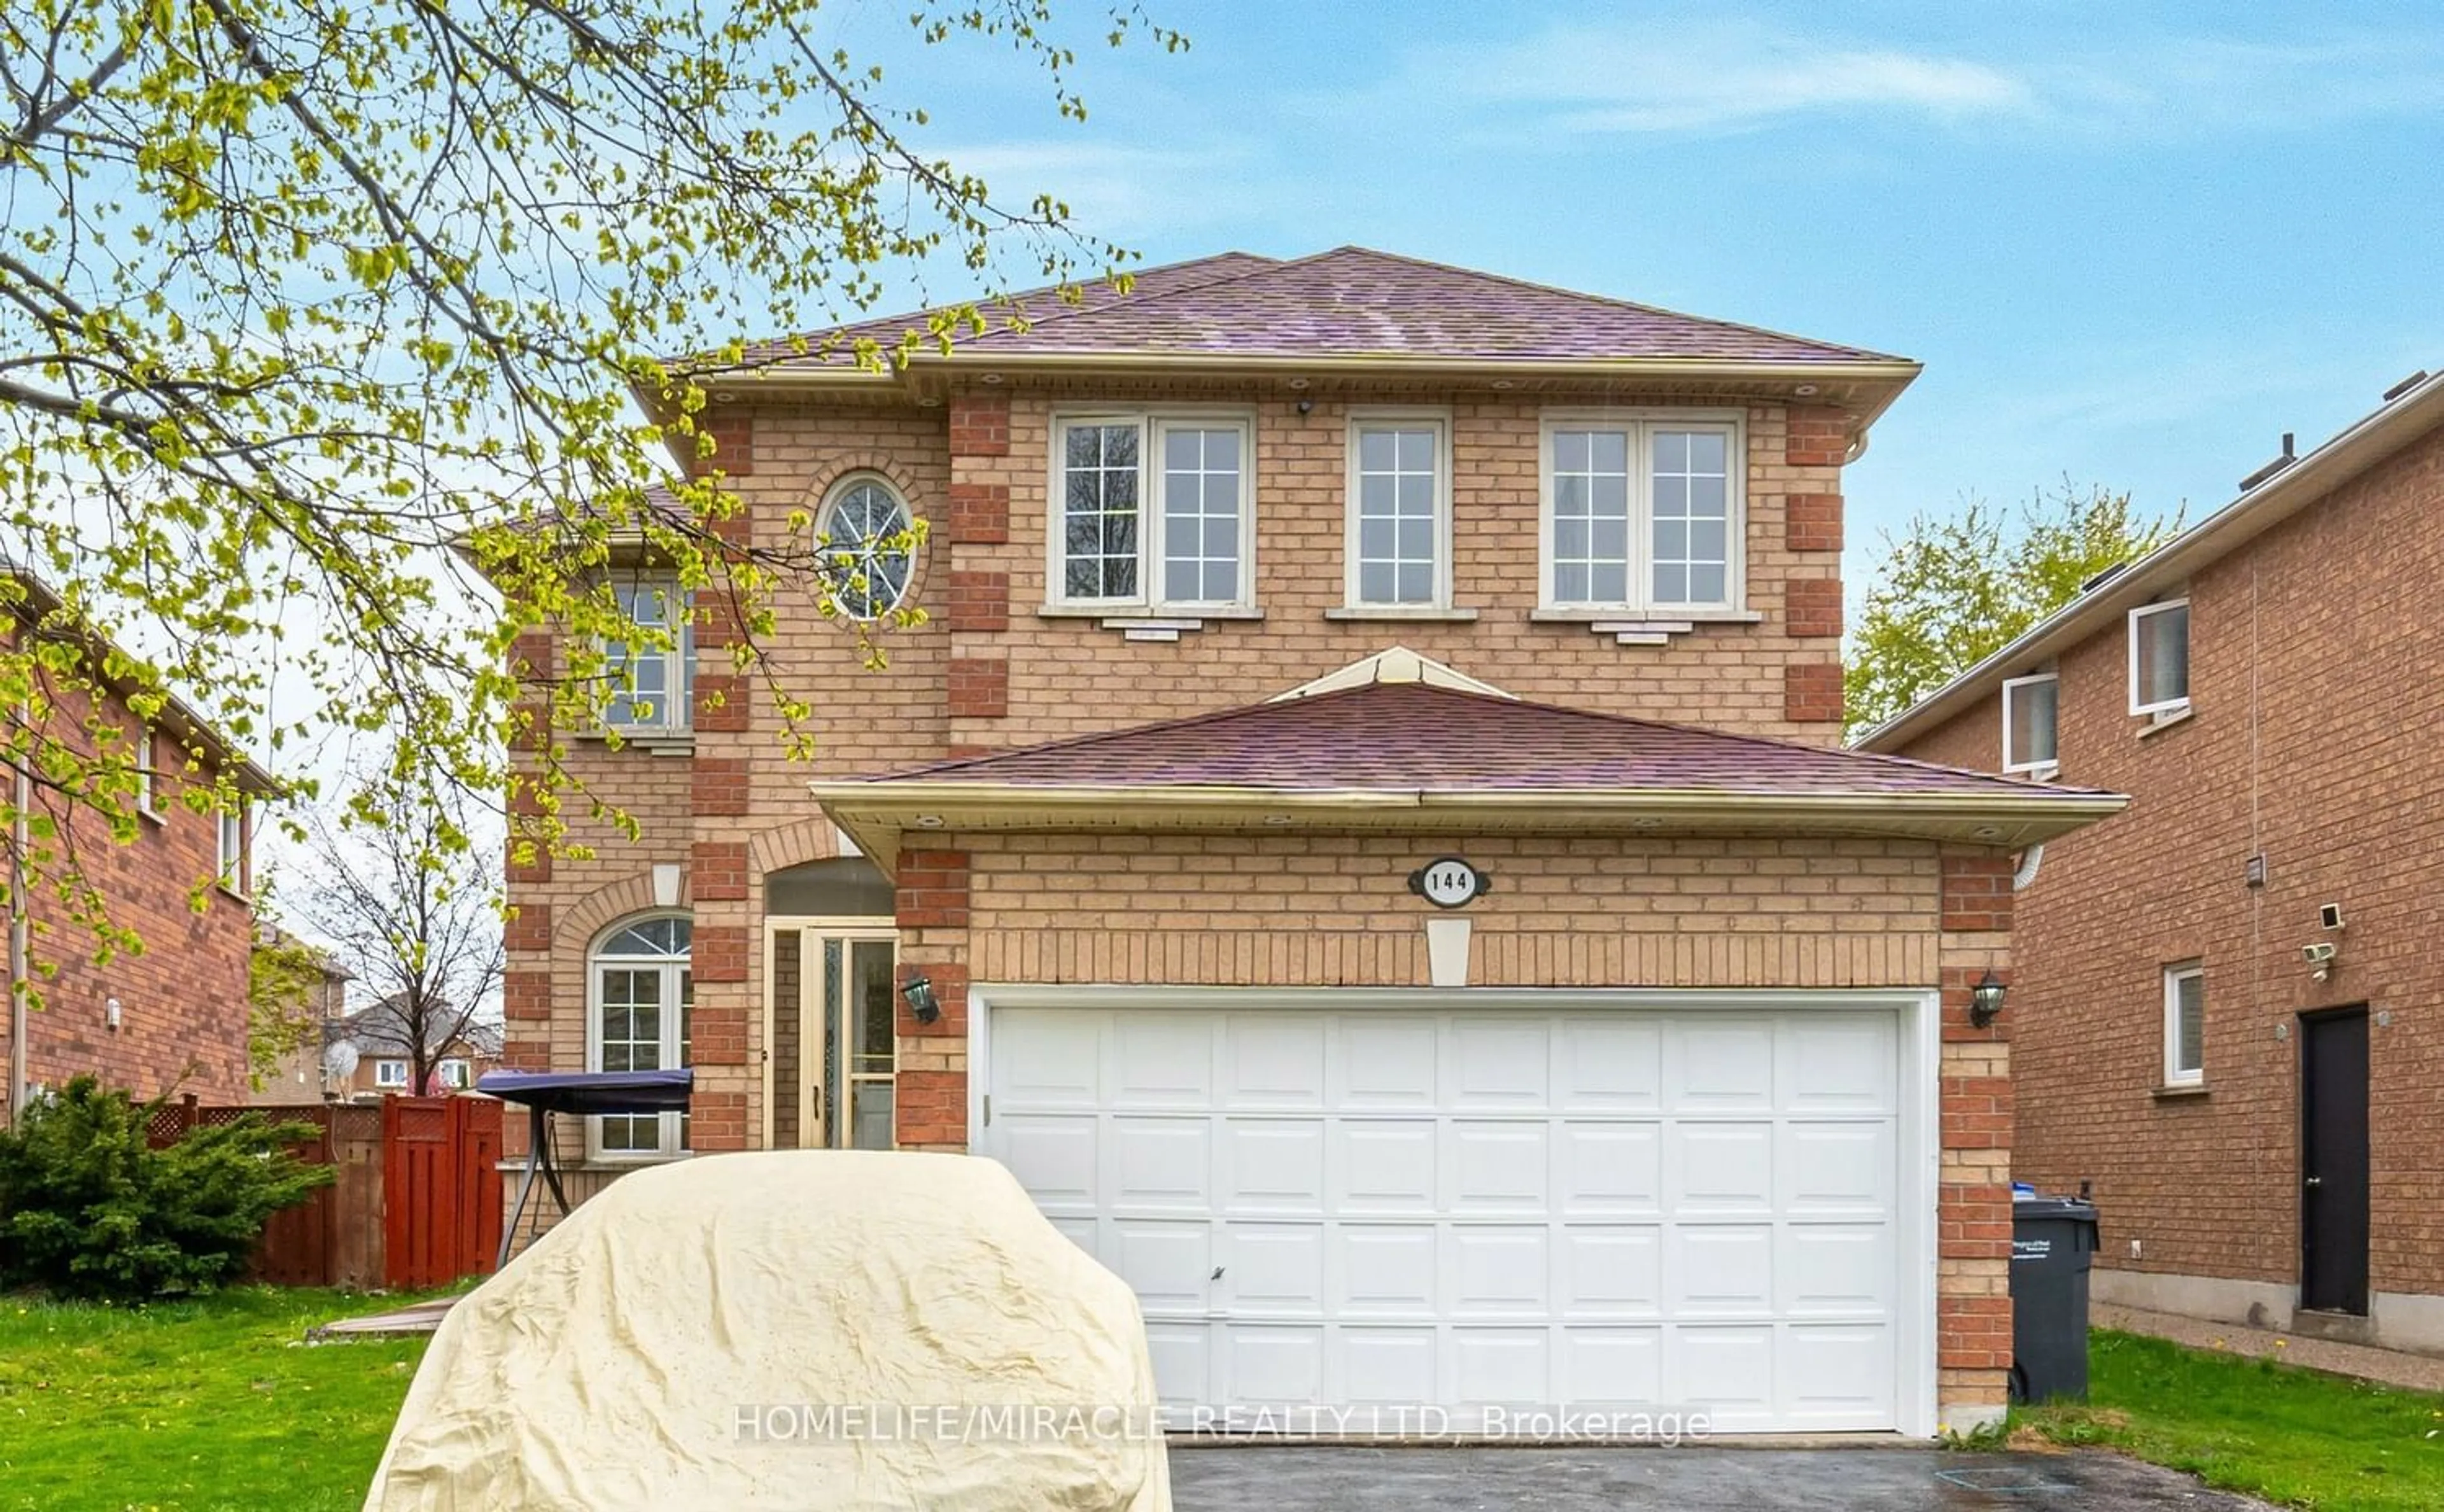 Home with brick exterior material for 144 Lockwood Rd, Brampton Ontario L6Y 4Z2